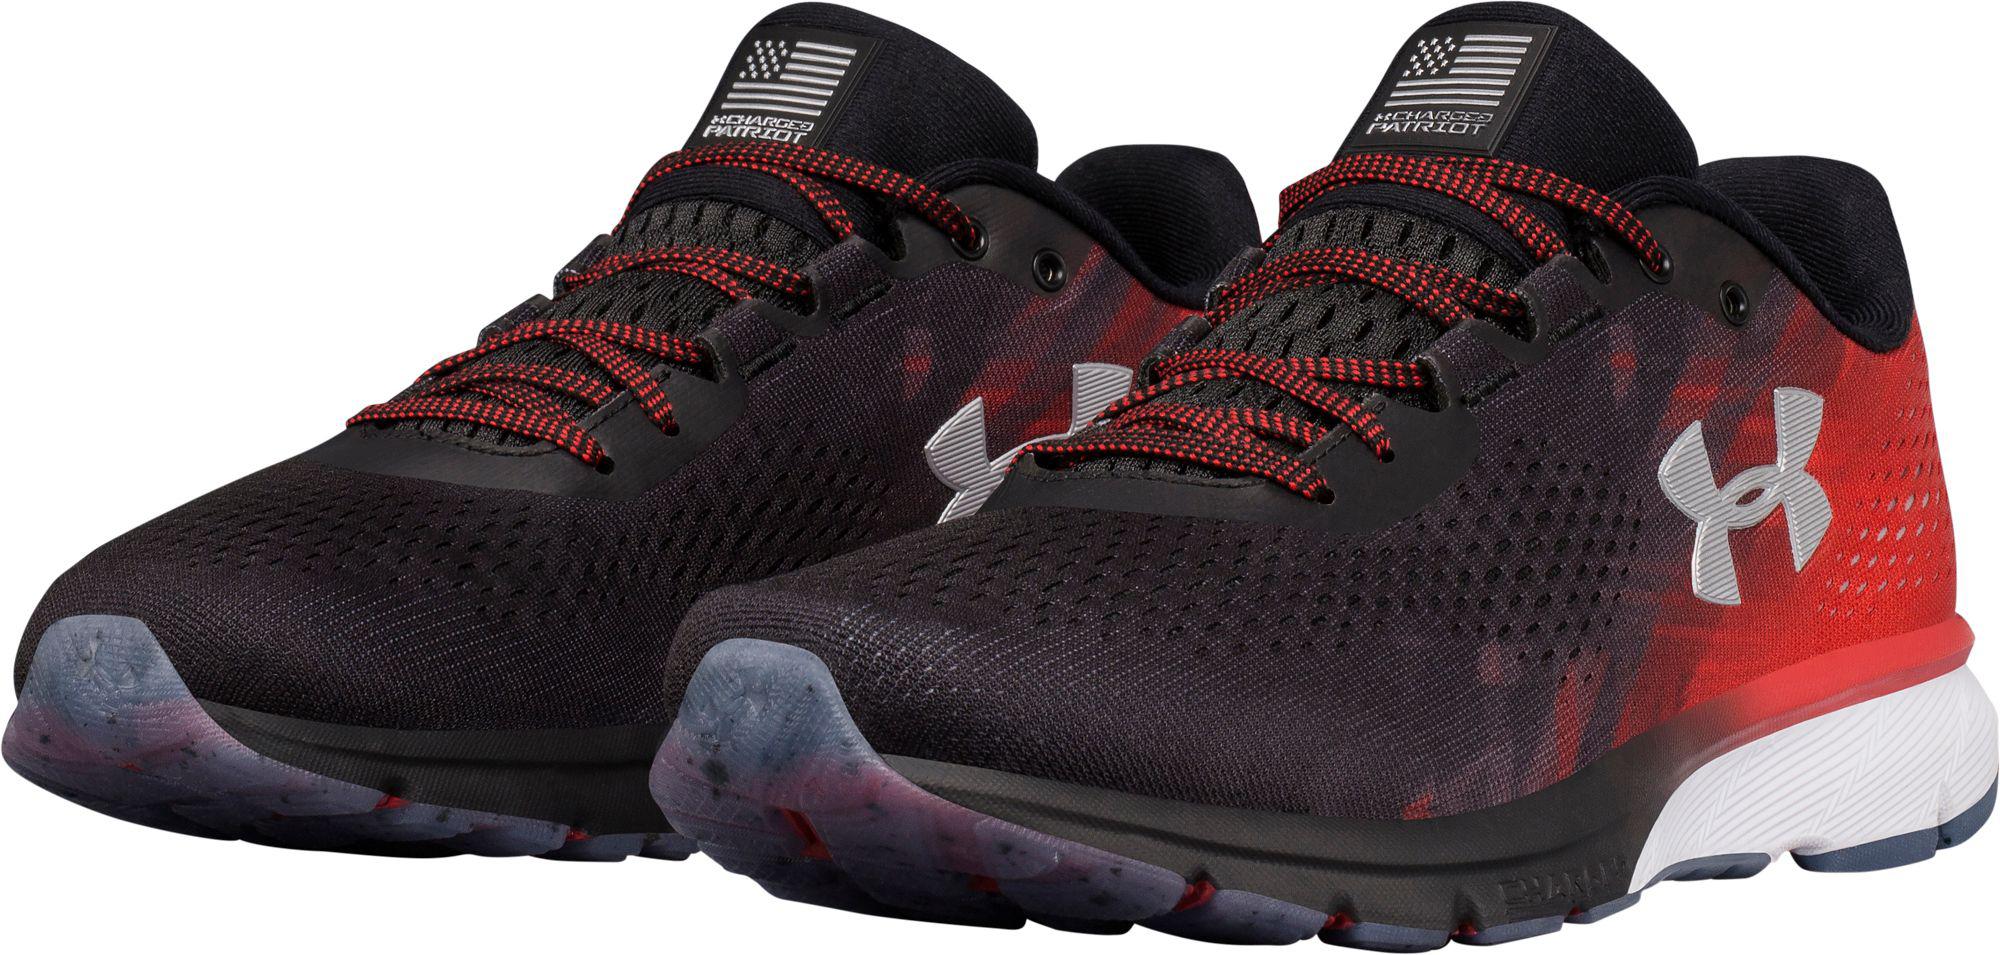 Charged Patriot Running Shoes 